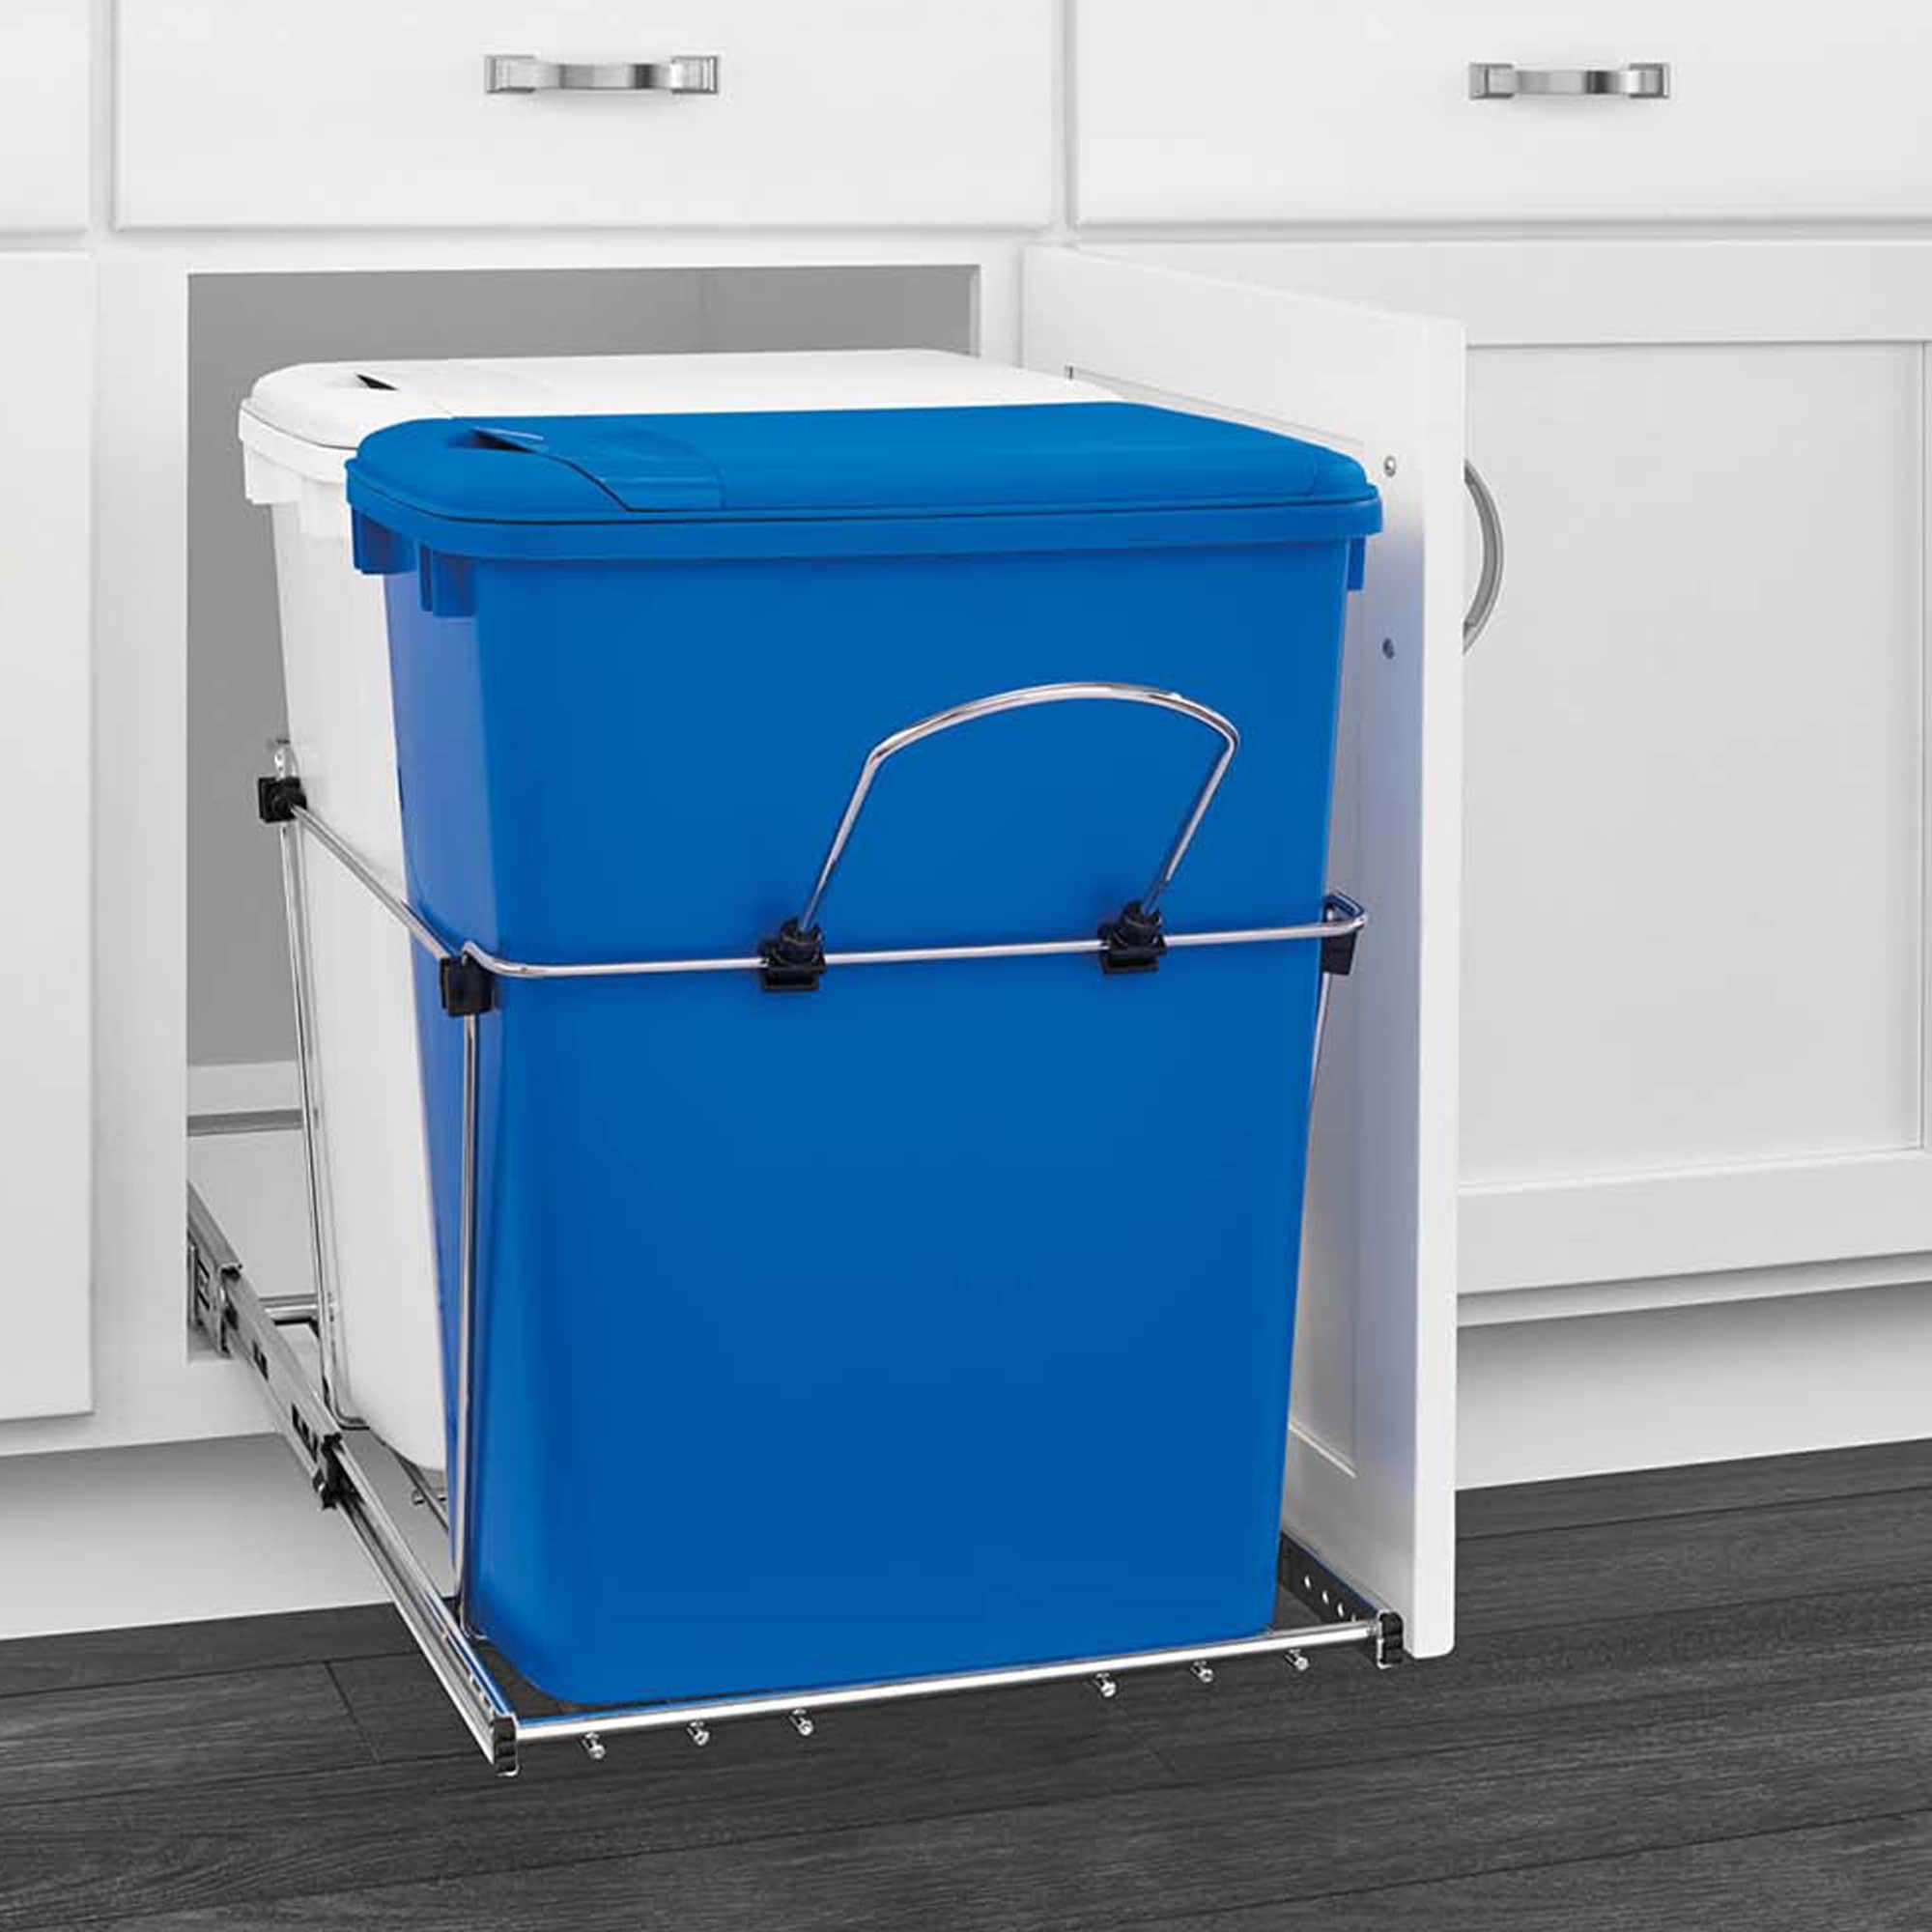 Double 35 Quart Sliding Pull-Out Waste Containers Garbage Trash